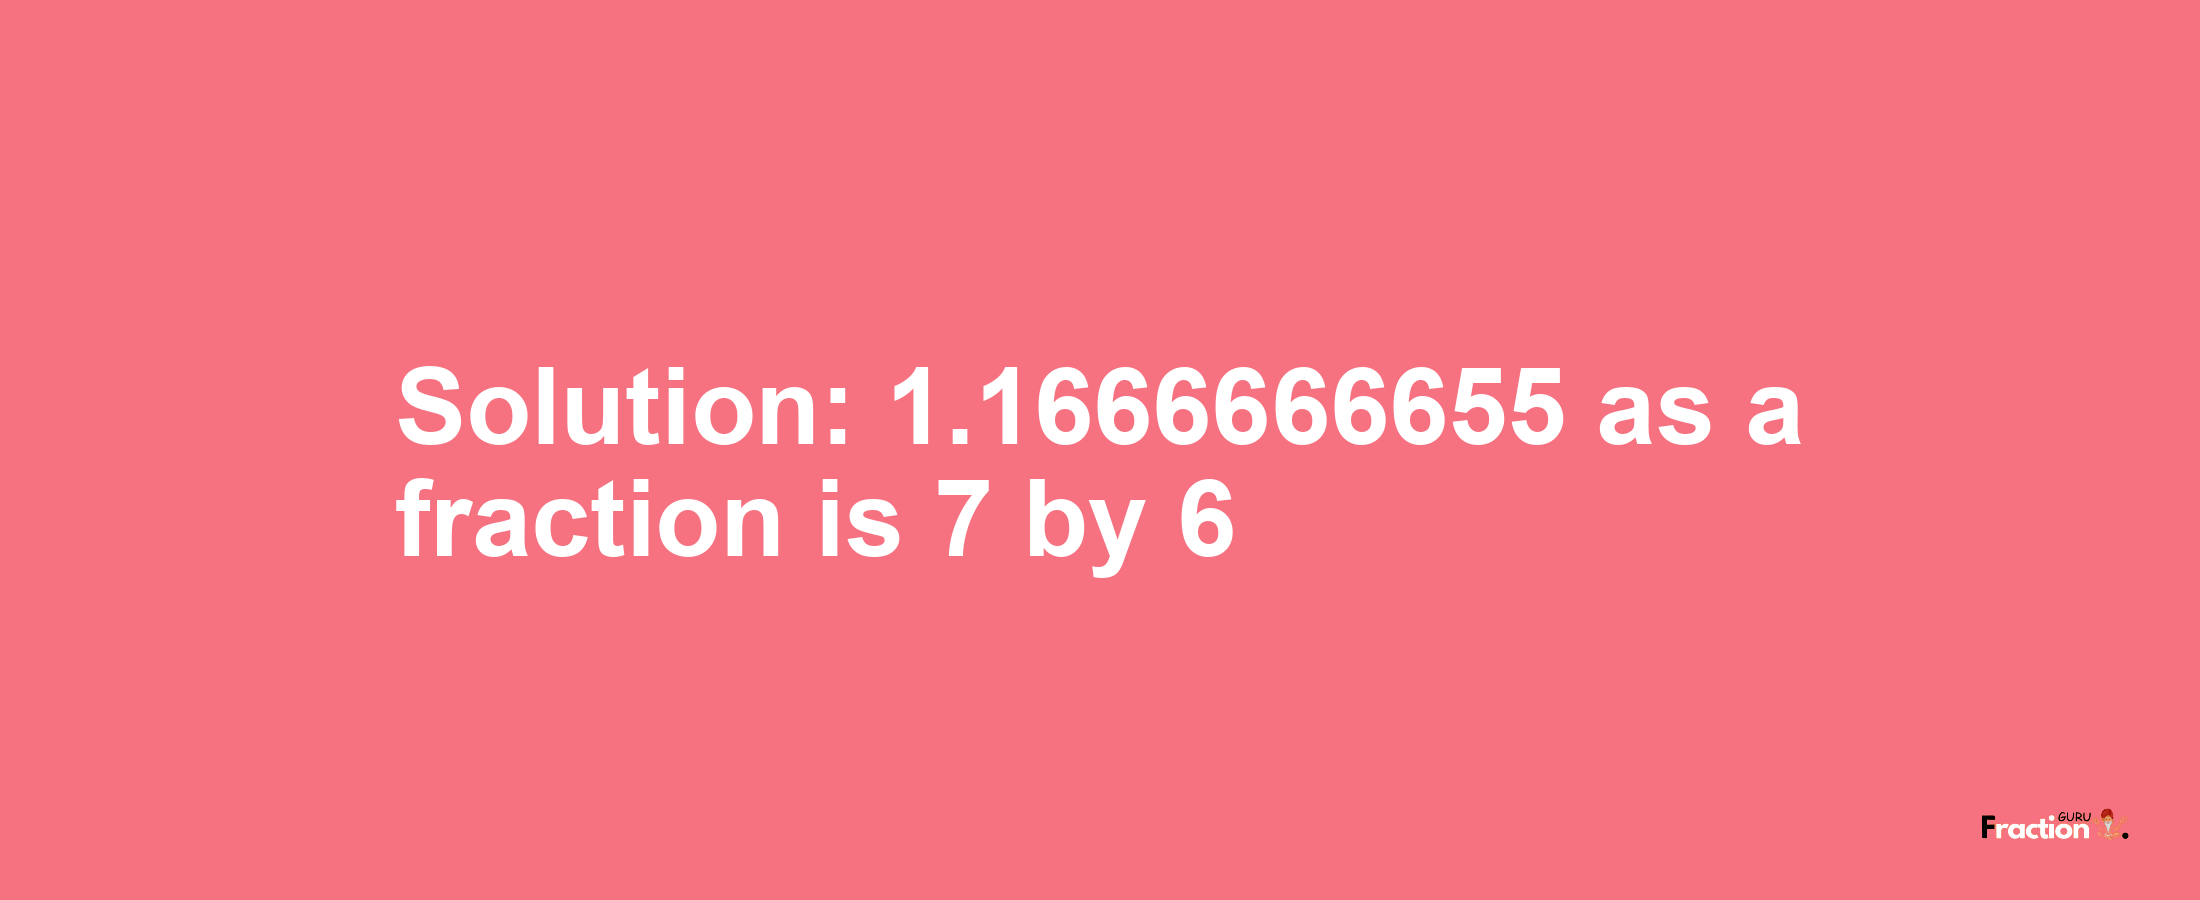 Solution:1.1666666655 as a fraction is 7/6